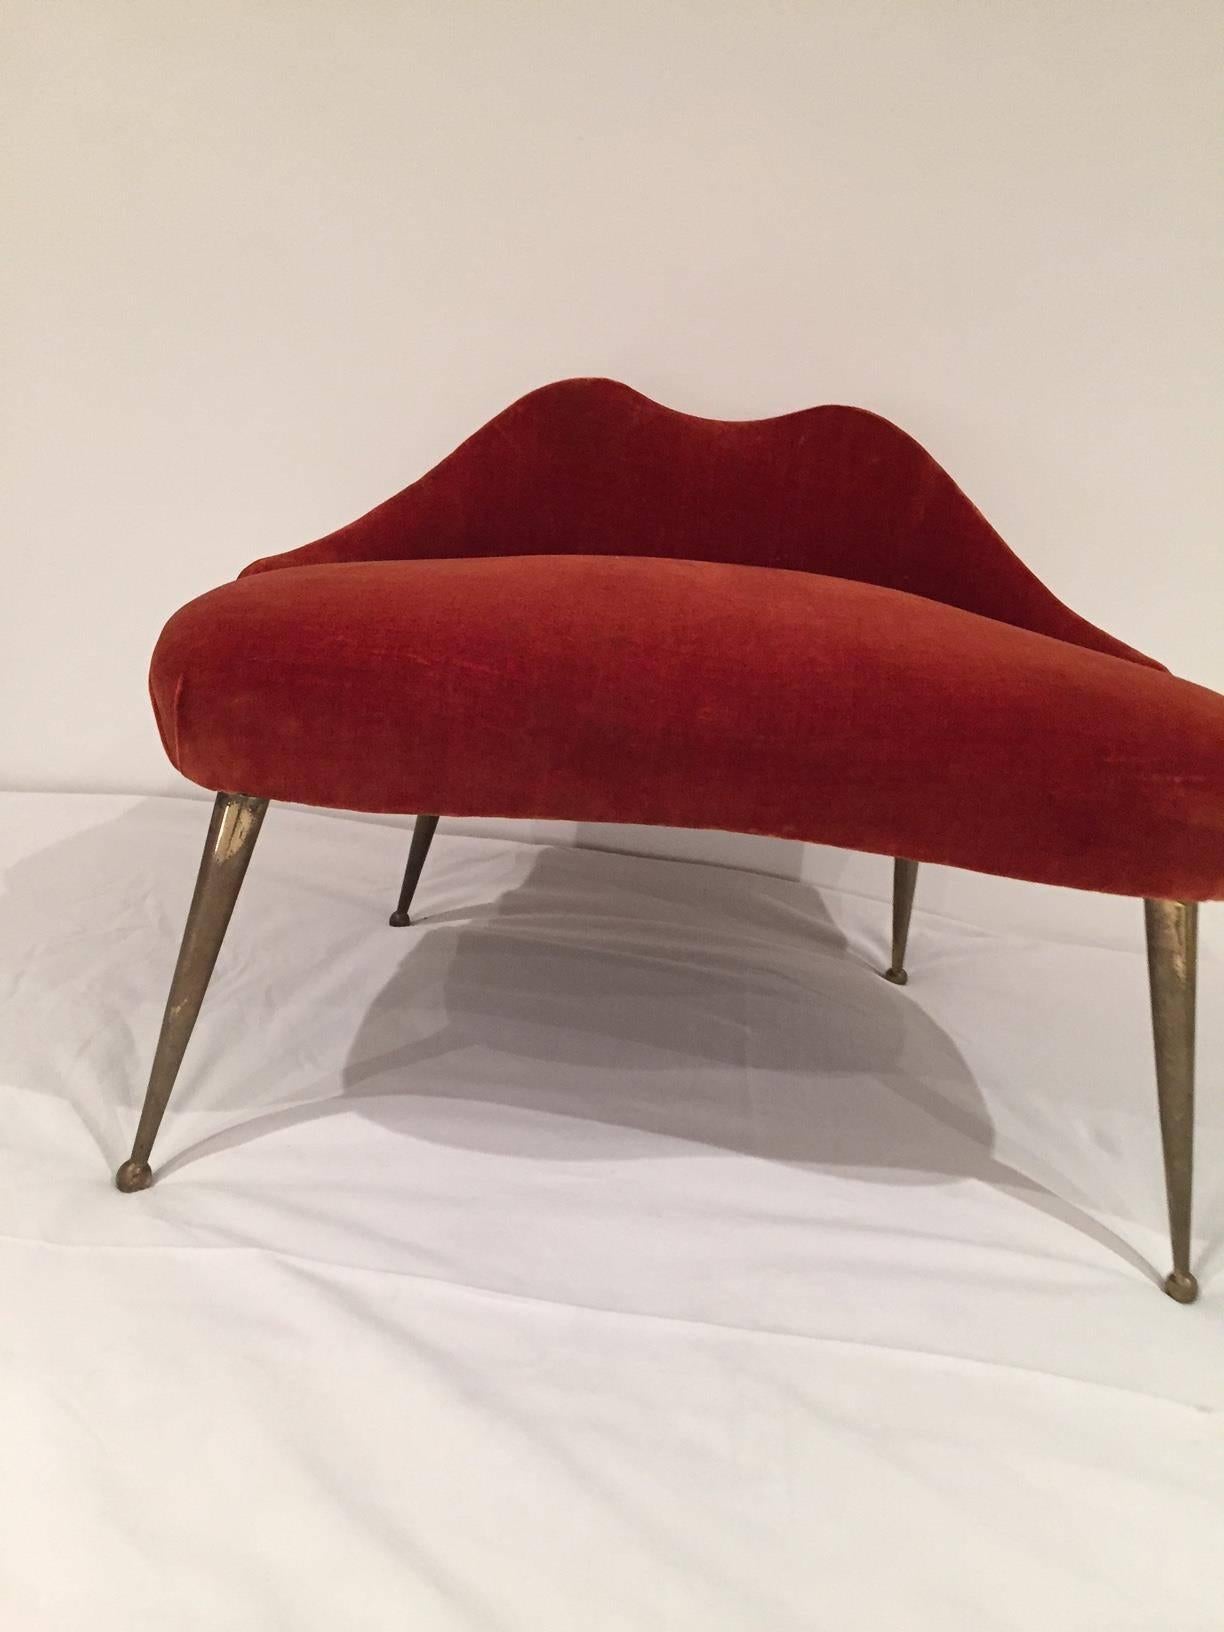 20th Century Italian 1950s Vintage Stool in the Shape of the Lips